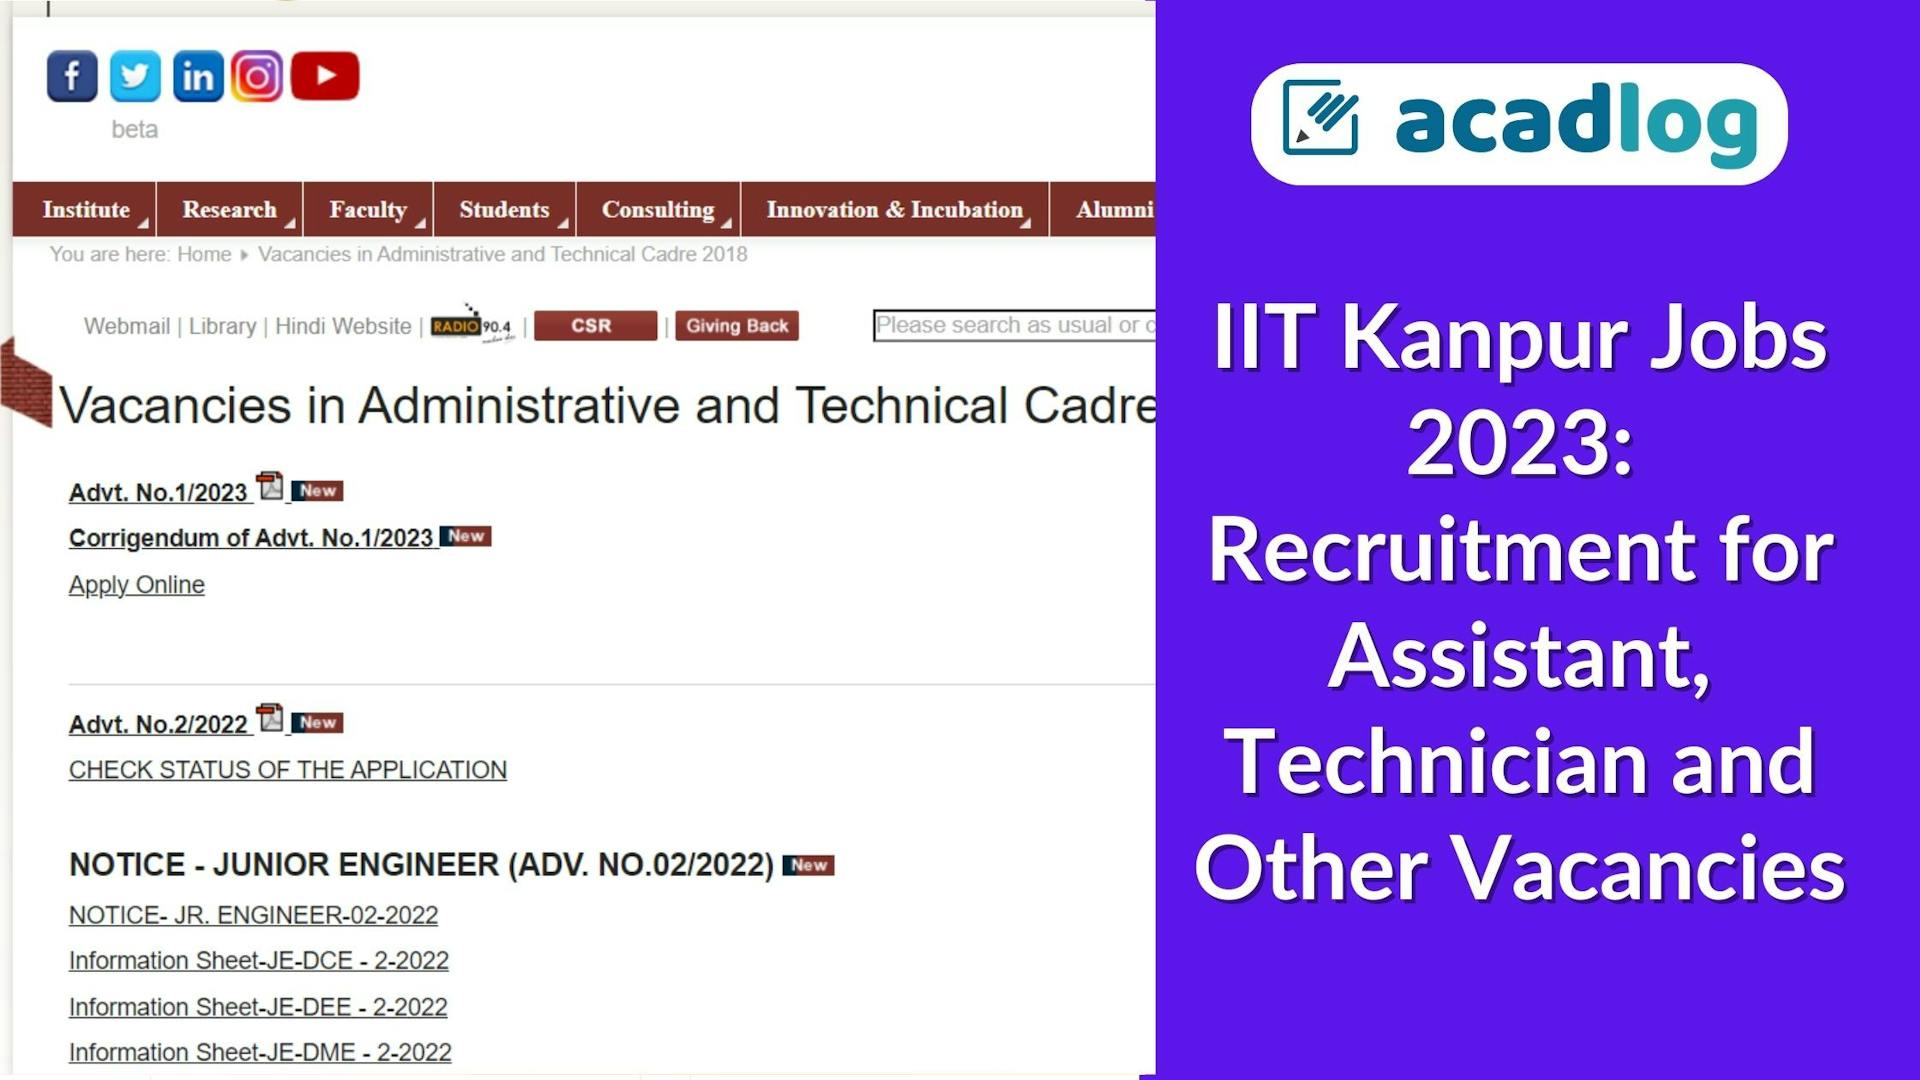 IIT Kanpur Jobs 2023: Recruitment for Assistant, Technician and Other Vacancies